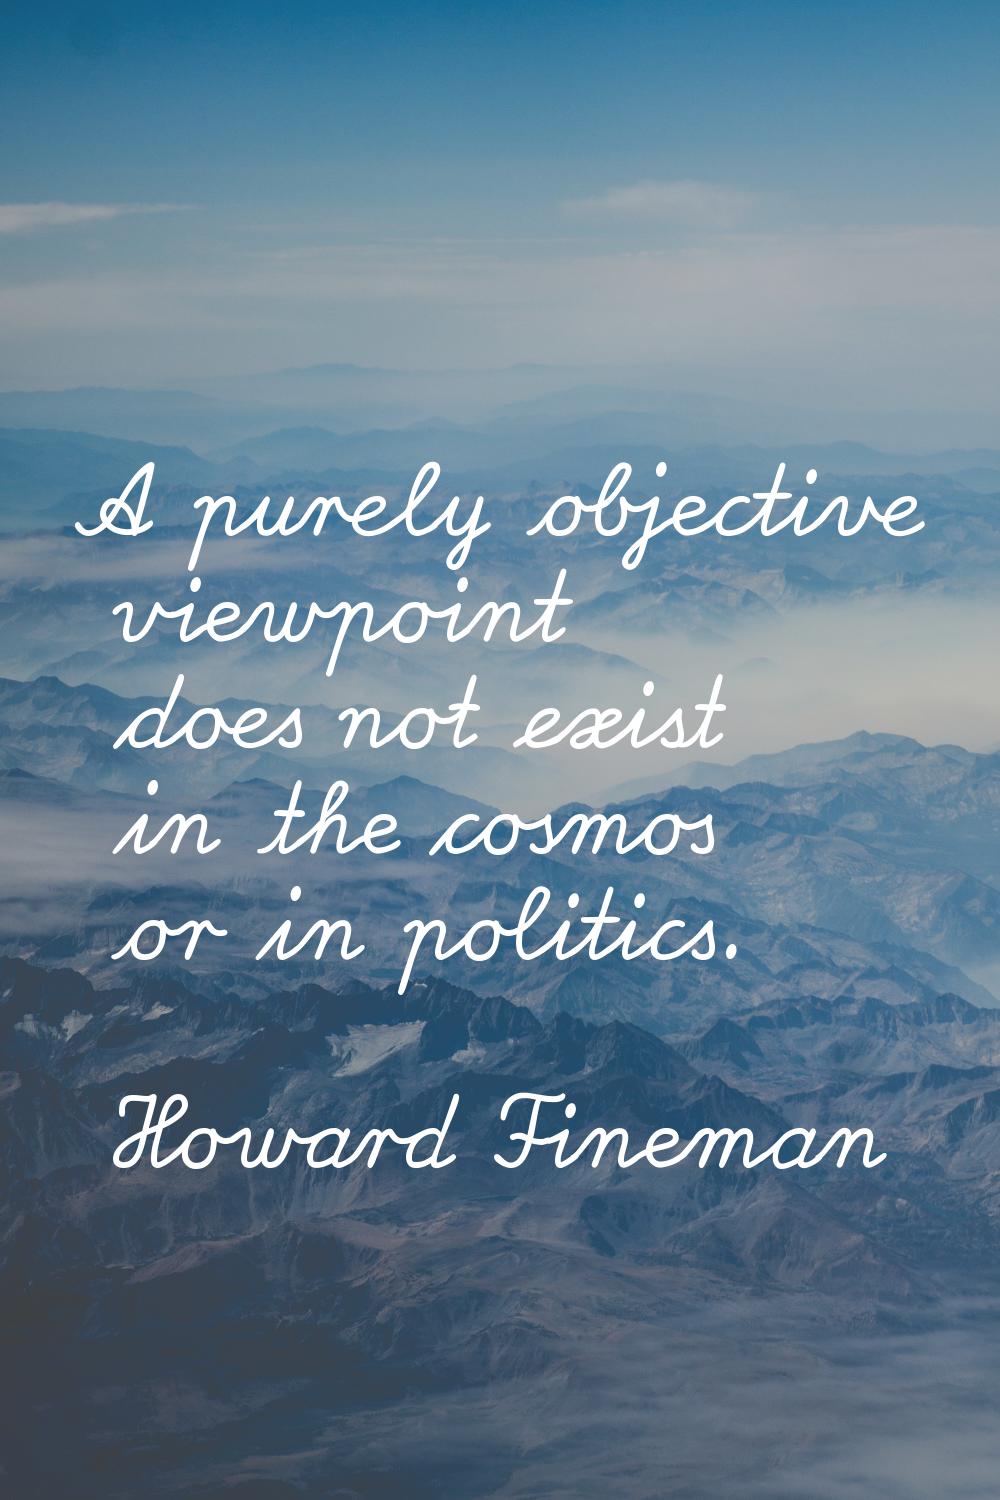 A purely objective viewpoint does not exist in the cosmos or in politics.